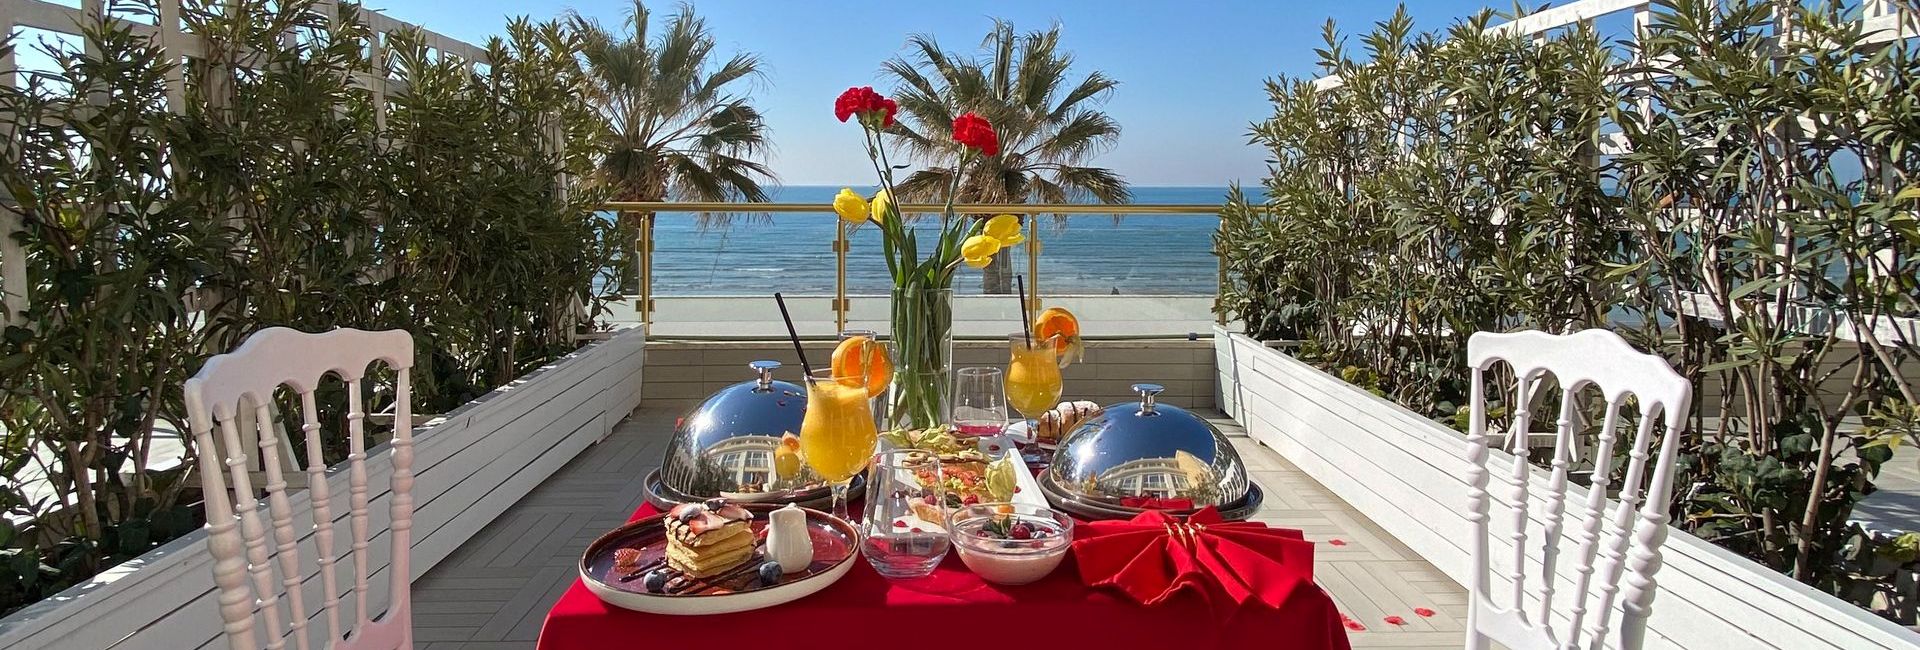 Fine dining with sea view at Adriatik Hotel in Durres, Albania